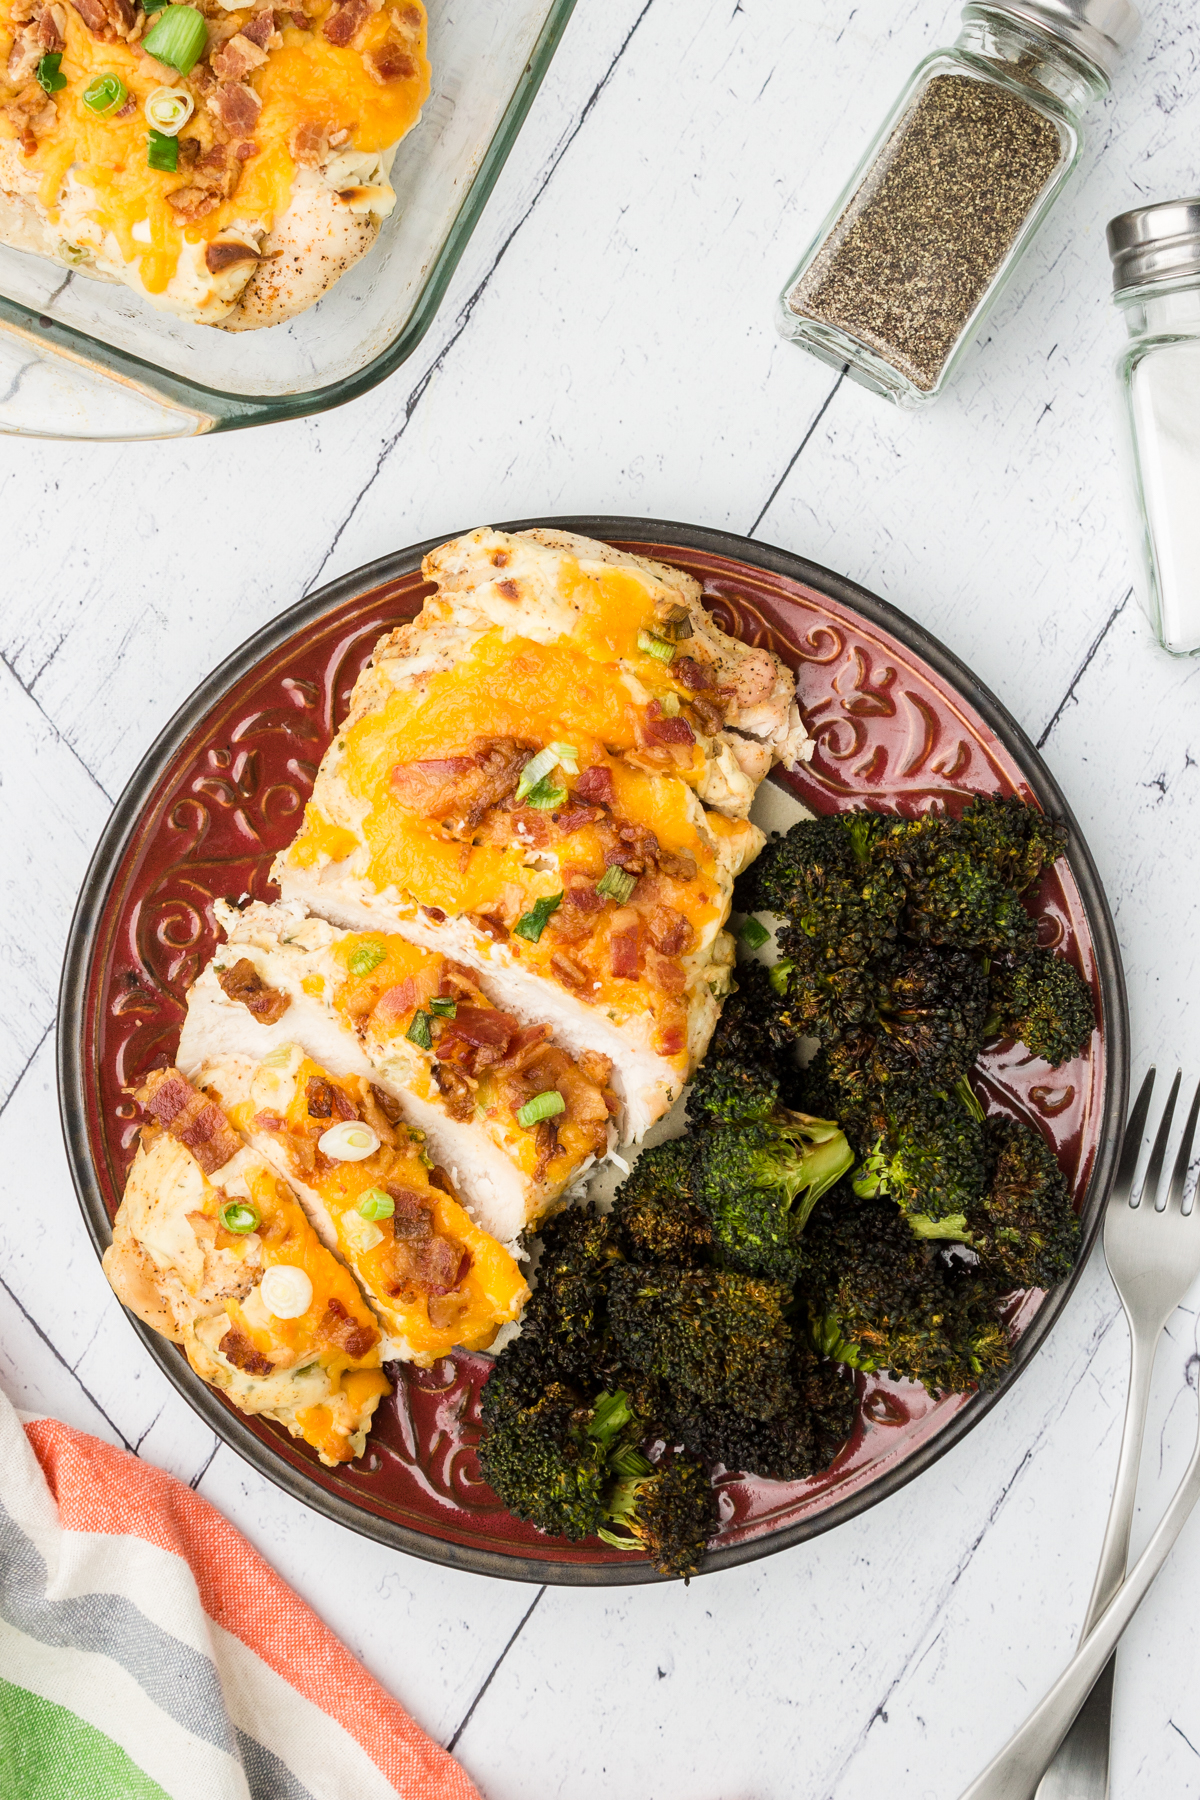 baked crack chicken on a plate with roasted broccoli side dish